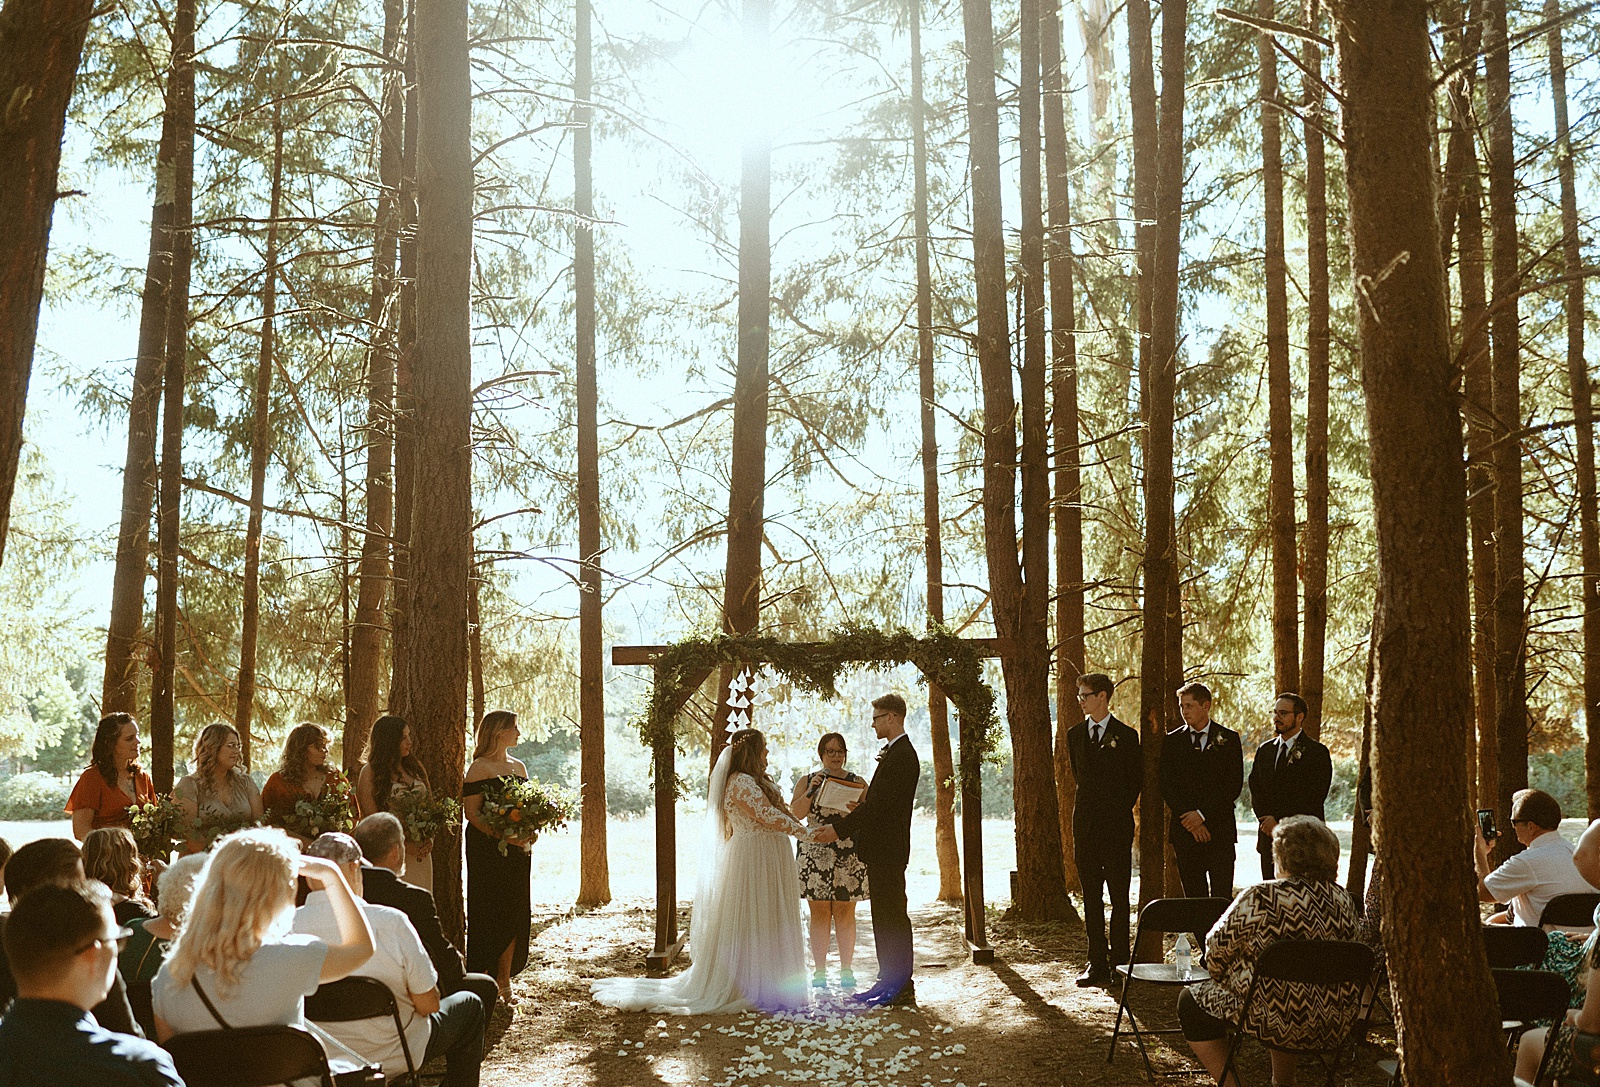 Bride and groom at alter in Oregon forest wedding by Danielle Johnson Photography